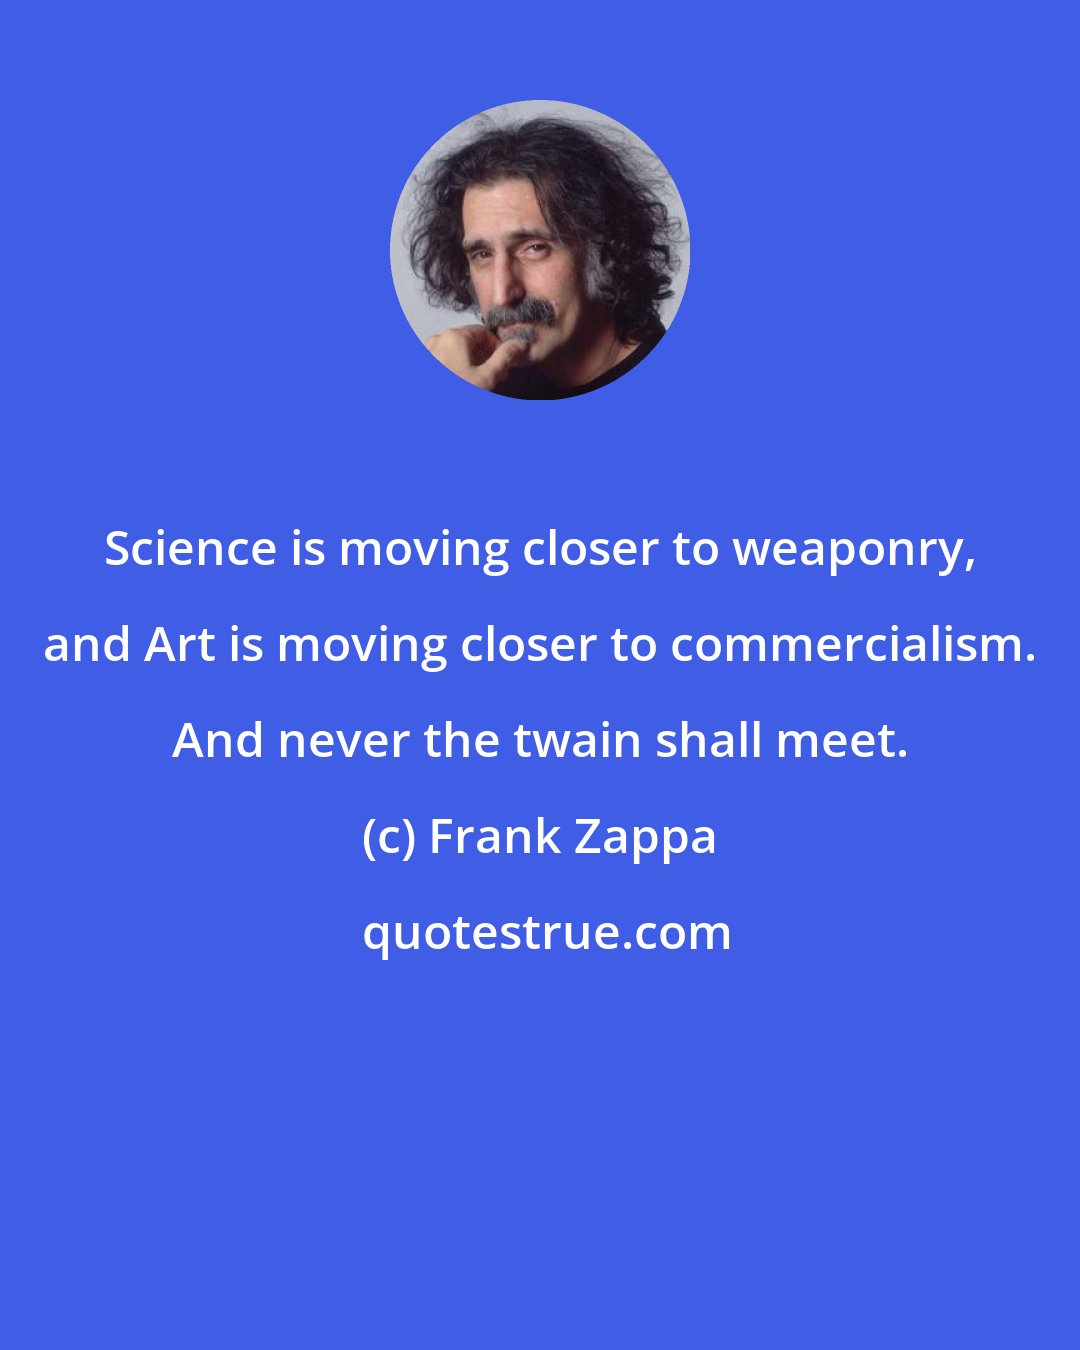 Frank Zappa: Science is moving closer to weaponry, and Art is moving closer to commercialism. And never the twain shall meet.